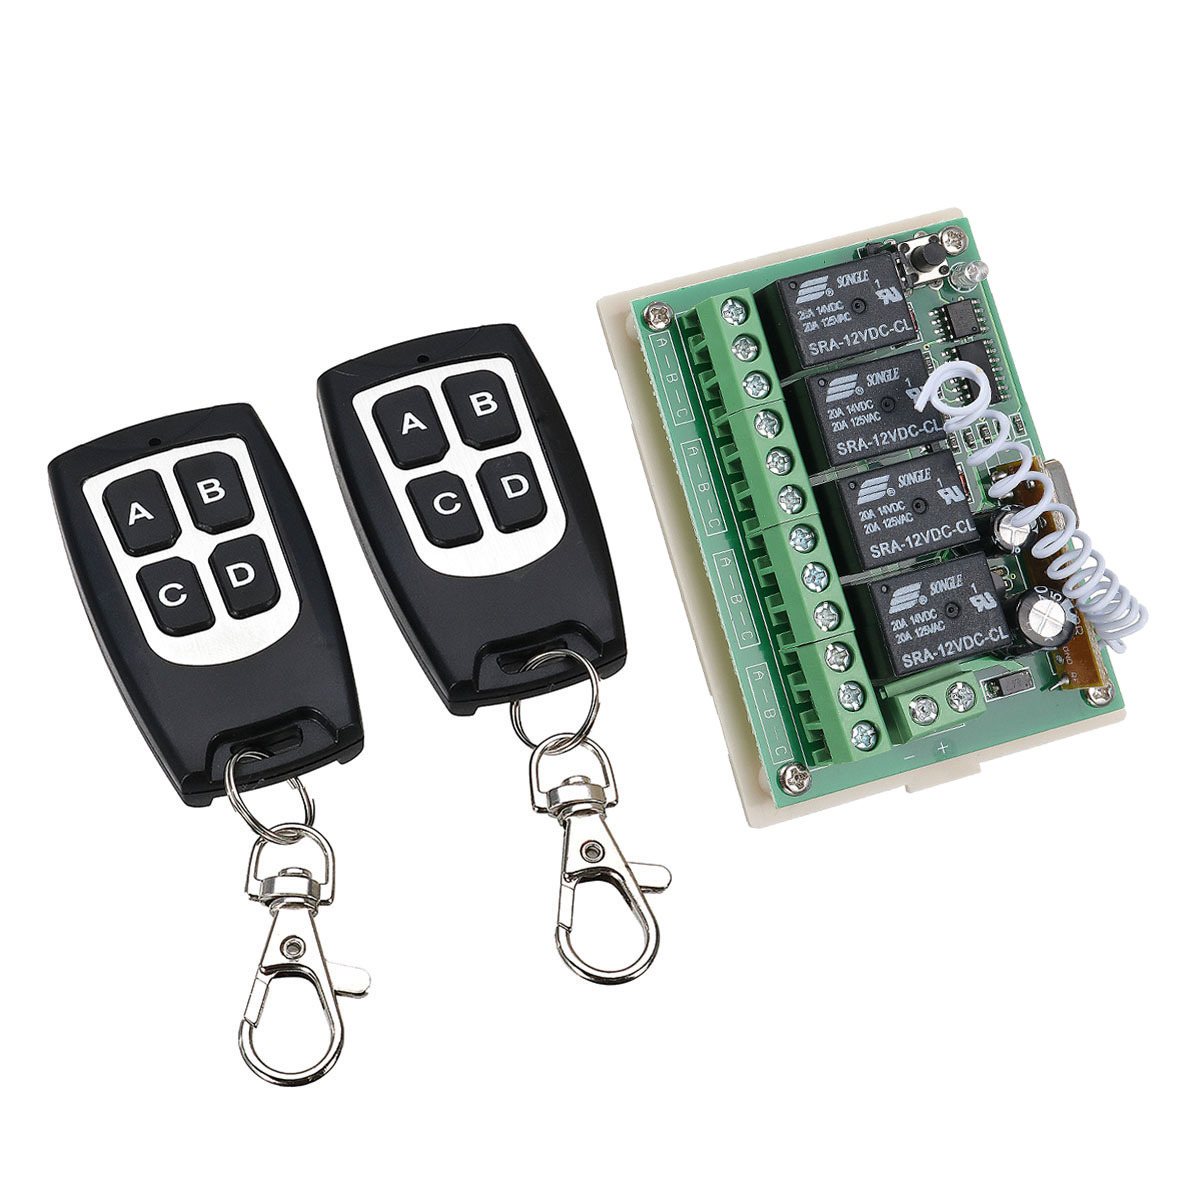 Geekcreit?® 12V 4CH Channel 433Mhz Wireless Remote Control Switch With 2 Transmitter 1